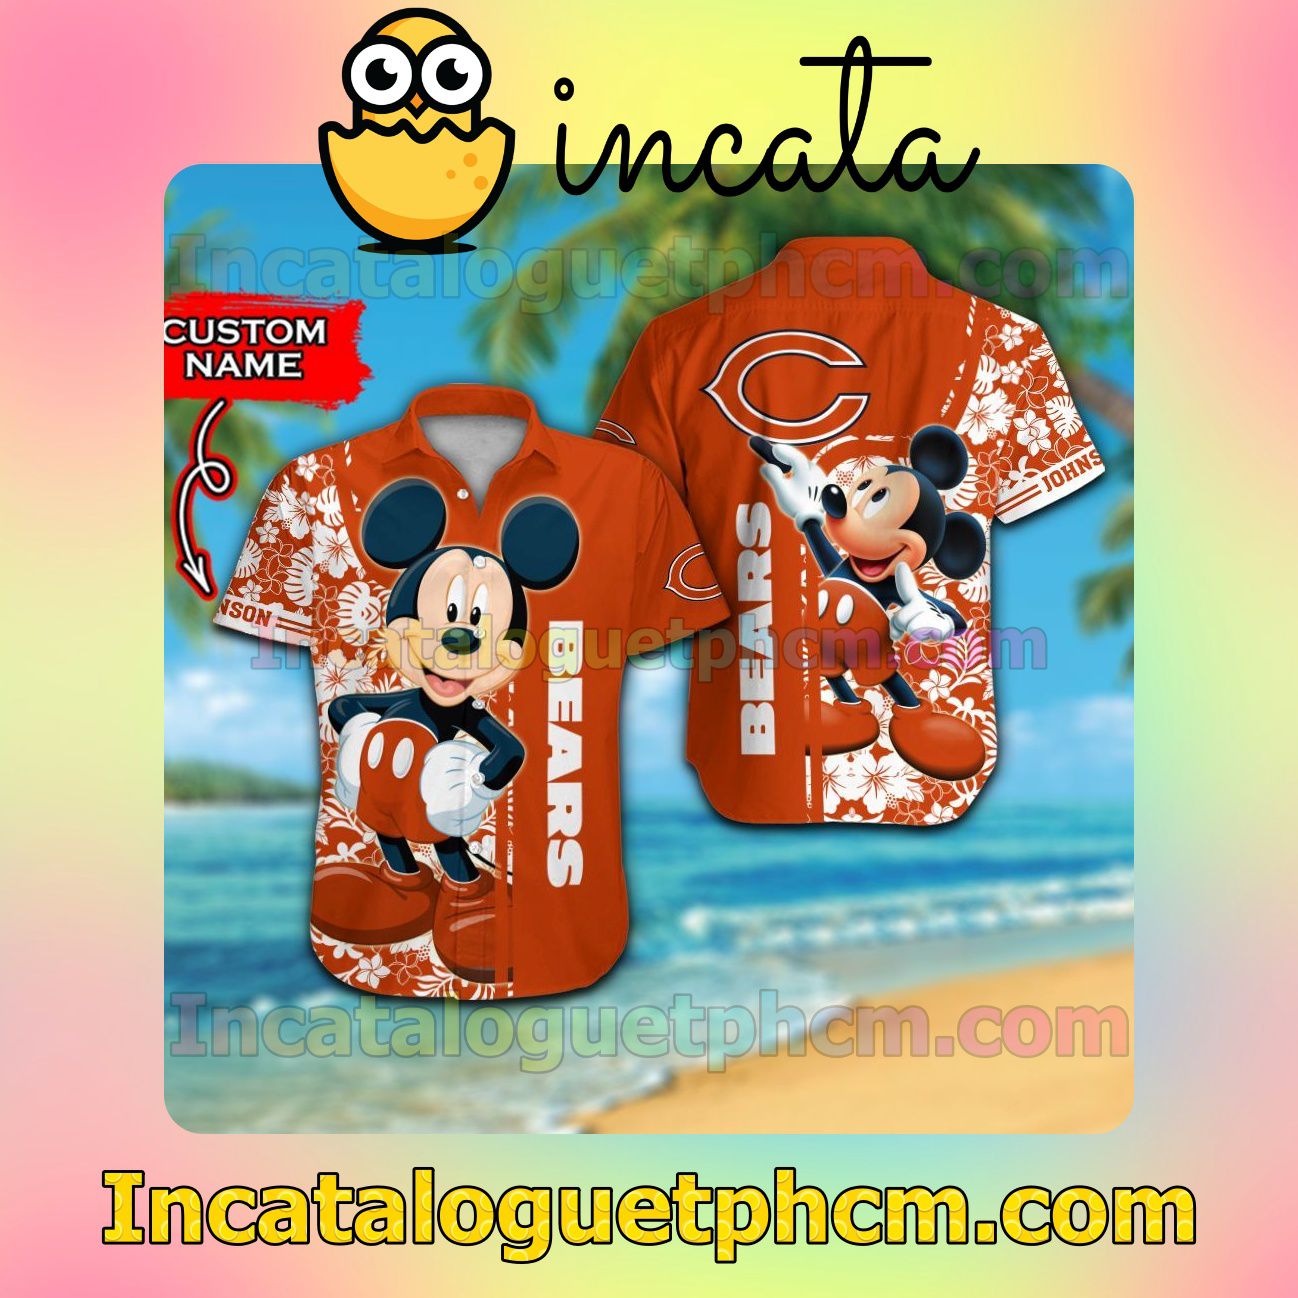 Personalized Chicago Bears & Mickey Mouse Beach Vacation Shirt, Swim Shorts